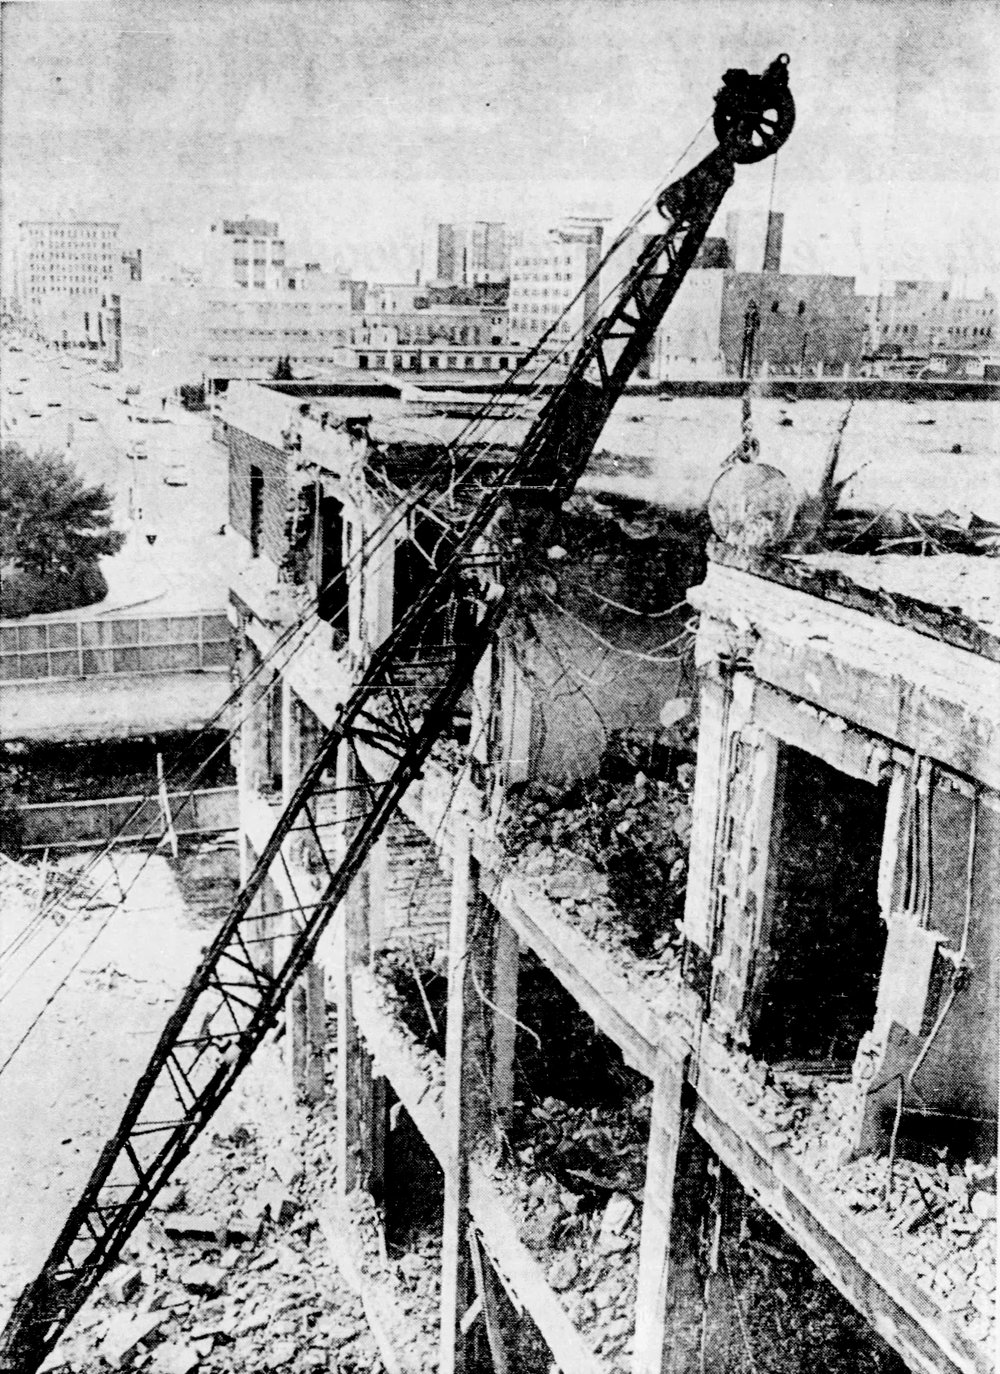  Demolition work on the old station is well underway in this August 1964 picture.   Edmonton Journal, August 19th, 1964.   